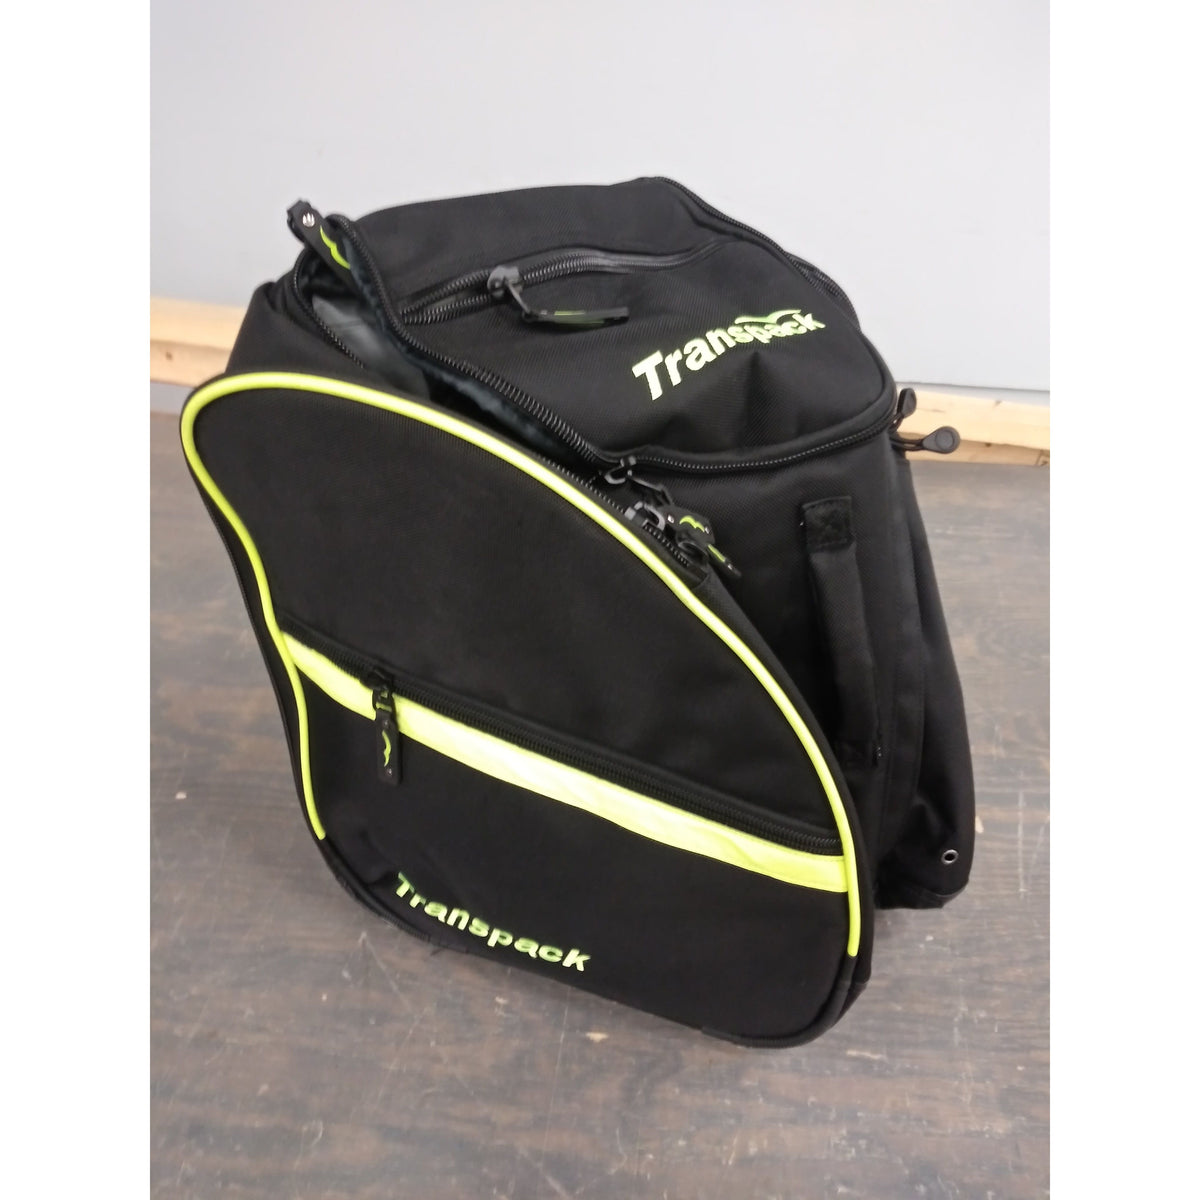 Transpack TRV Ballistic Pro Snow Gear Bag - Black/Yellow Electric - Used - Acceptable